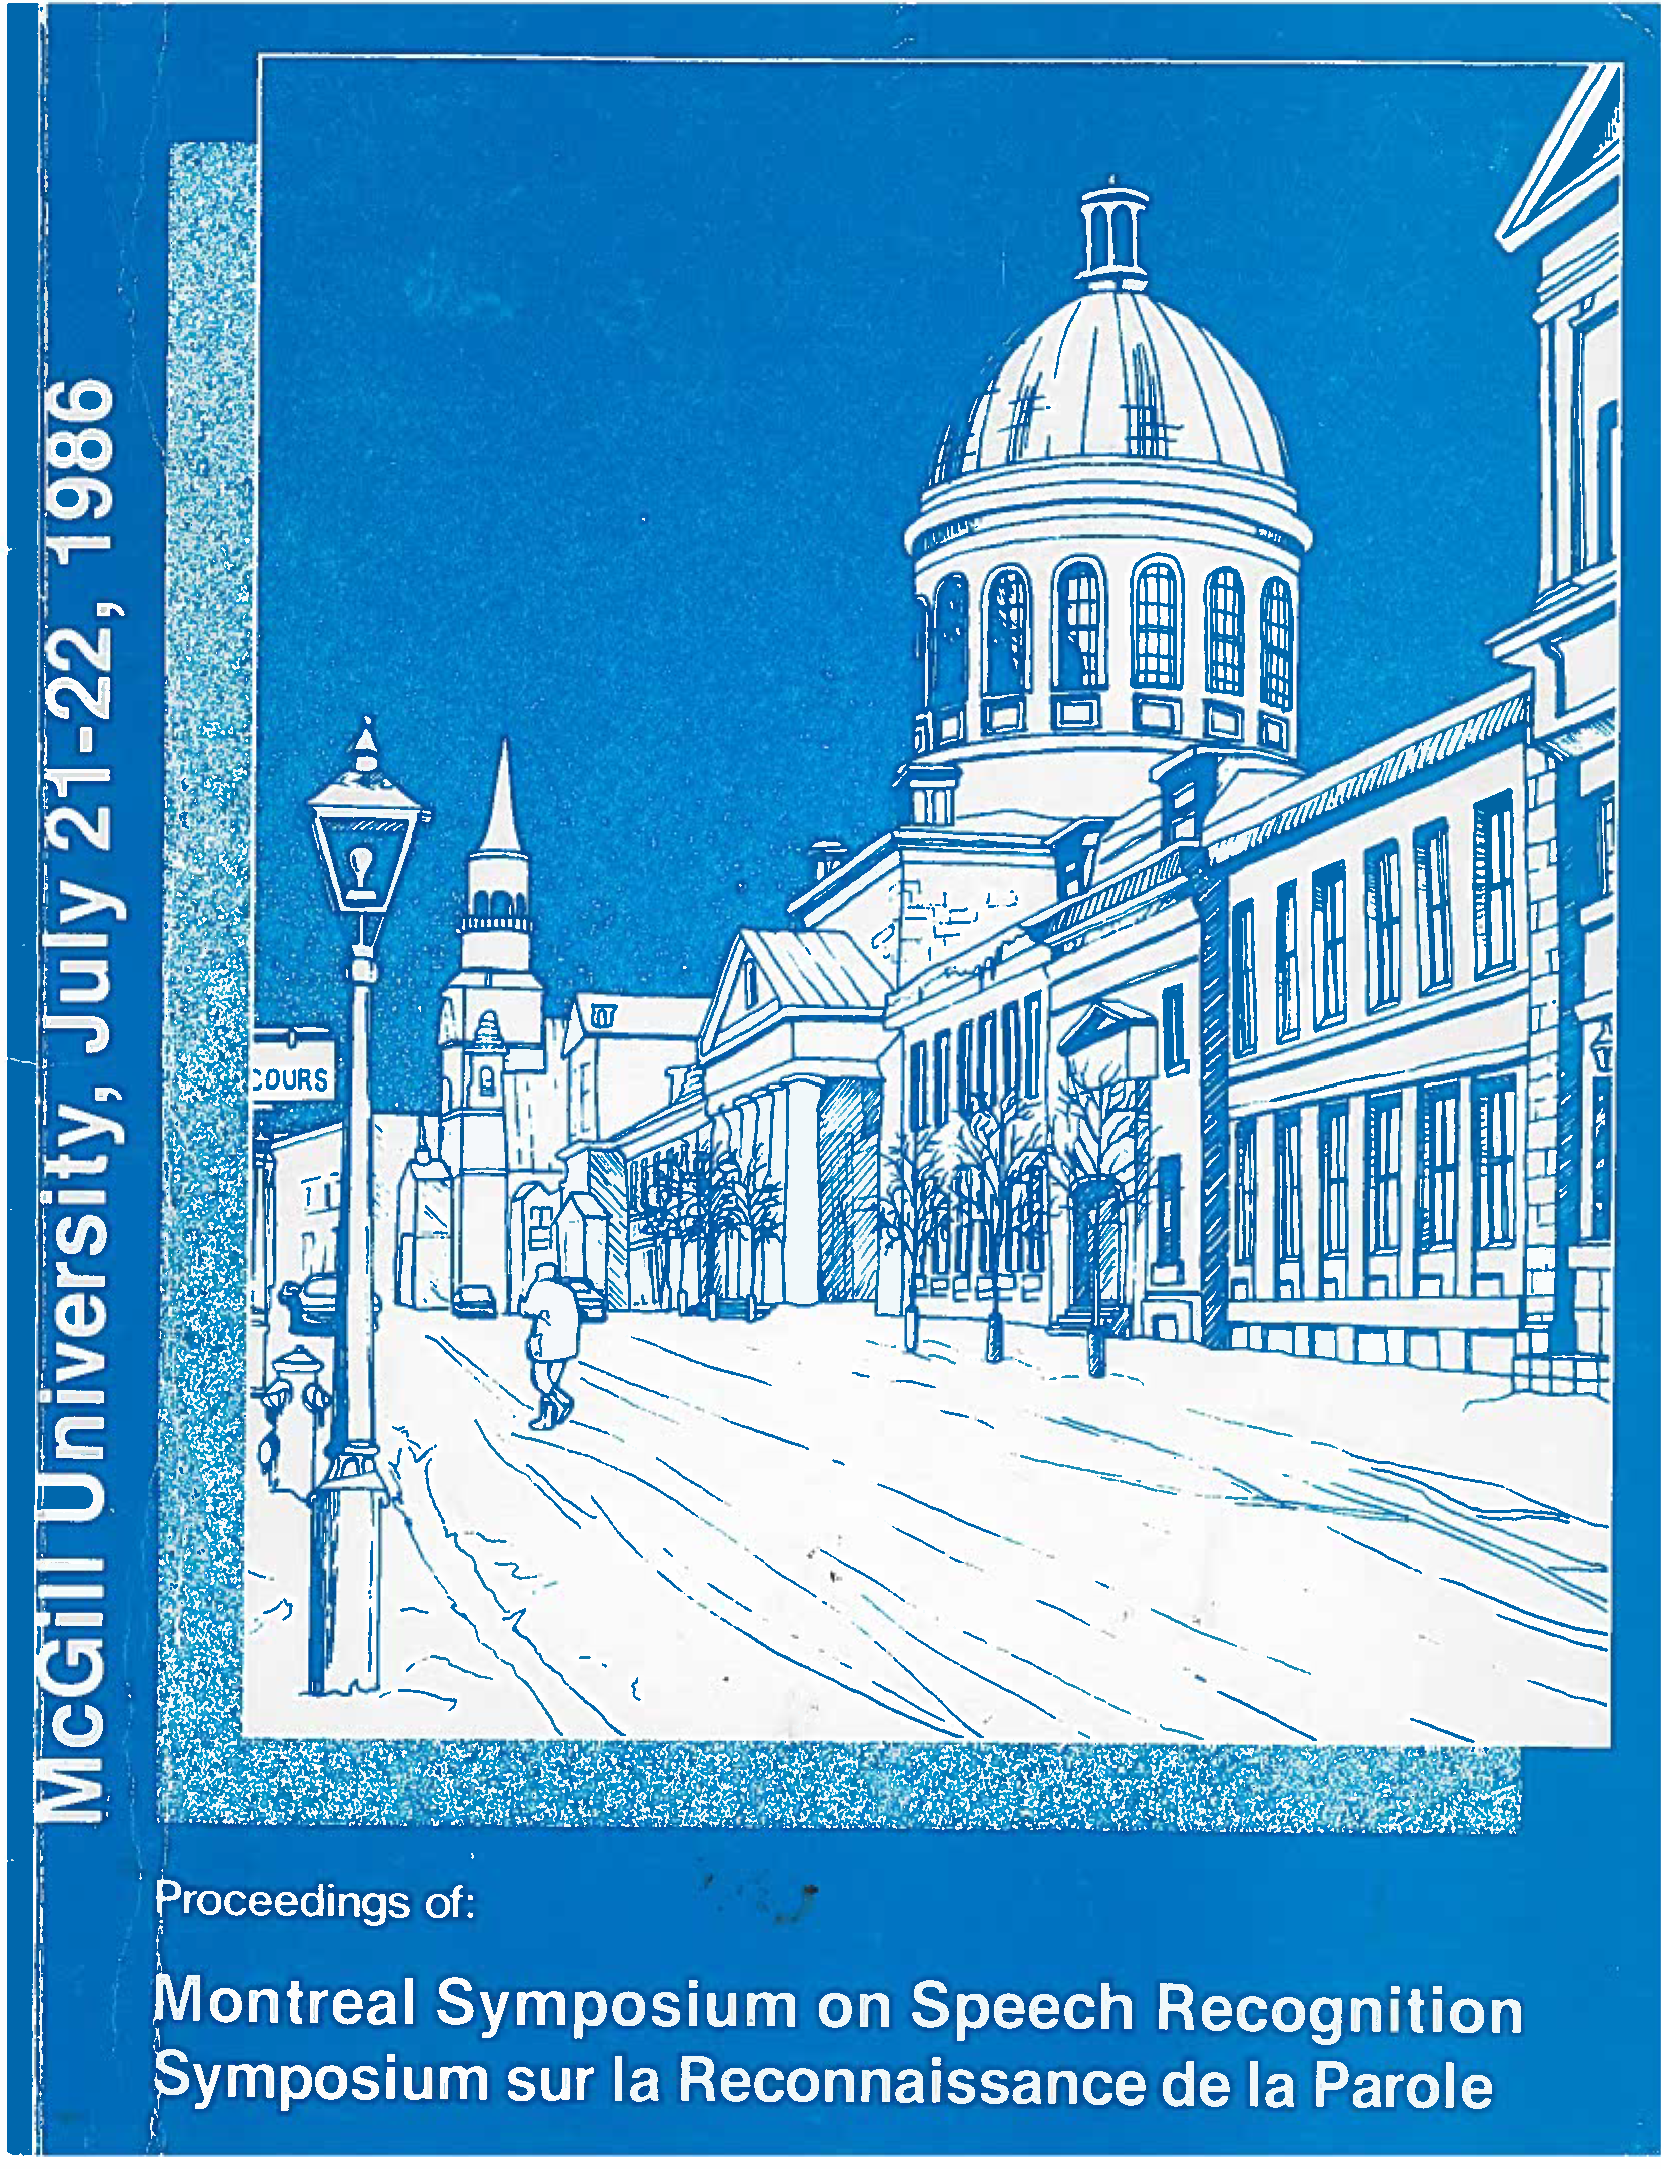 					View Vol. 14 No. 3 bis (1986): Montreal Symposium On Speech Recognition
				